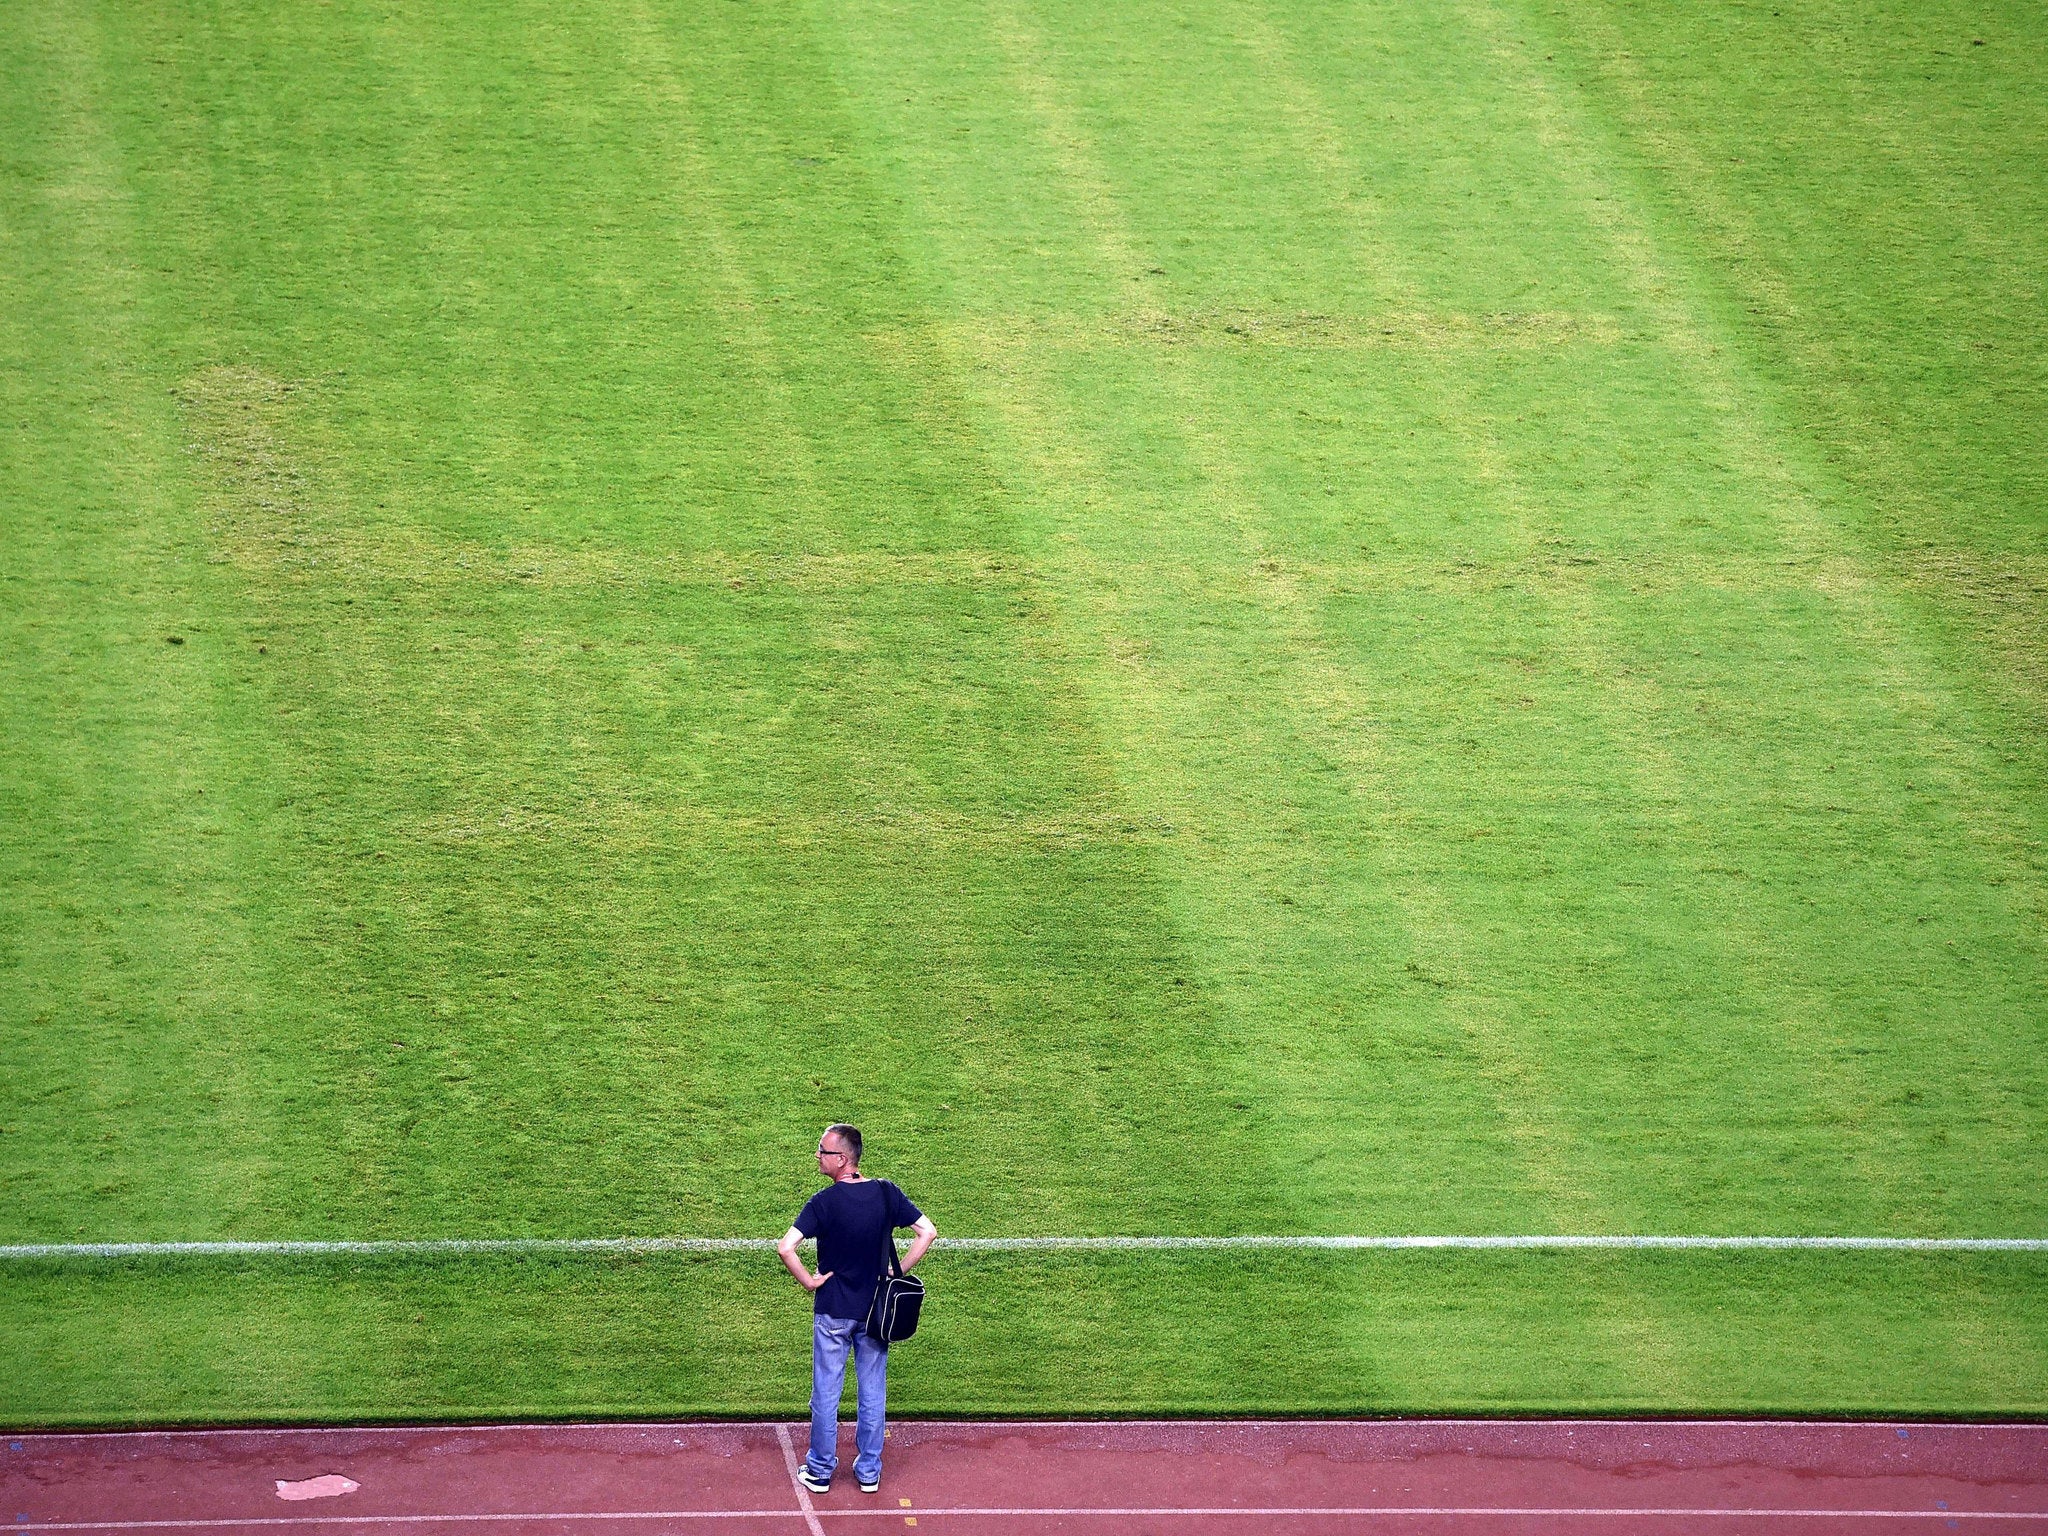 The symbol could clearly be seen in the mown grass during the match